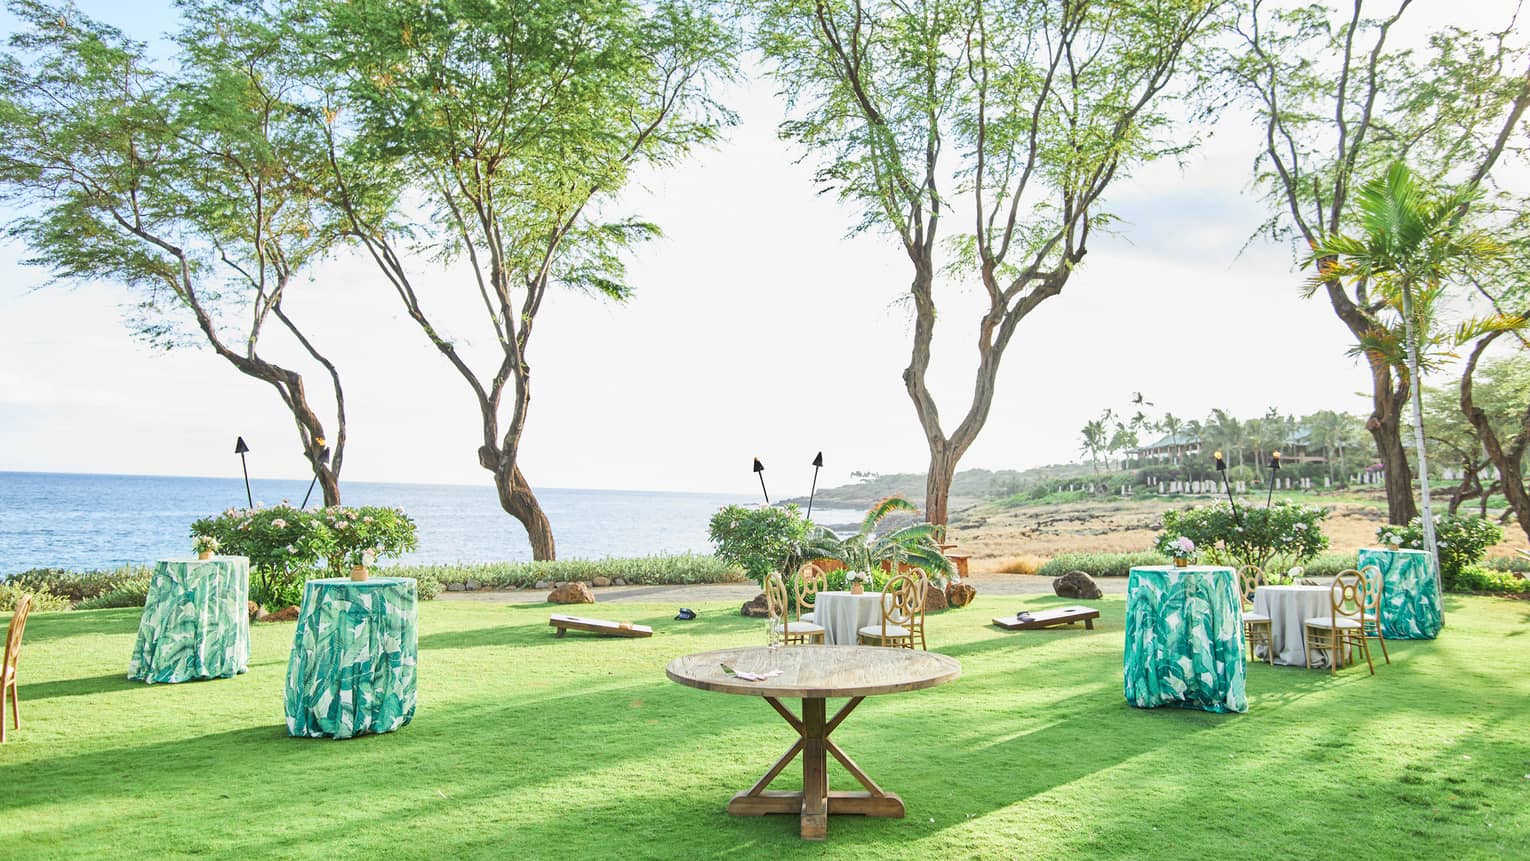 A series of tables with green floral table cloths in a lush green field overlooking a calm sea.